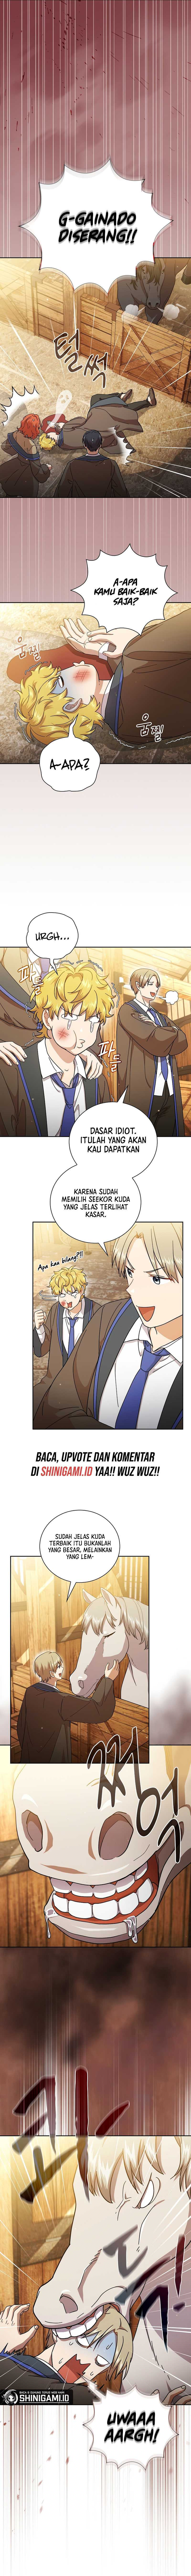 Magic Academy Survival Guide Chapter 35